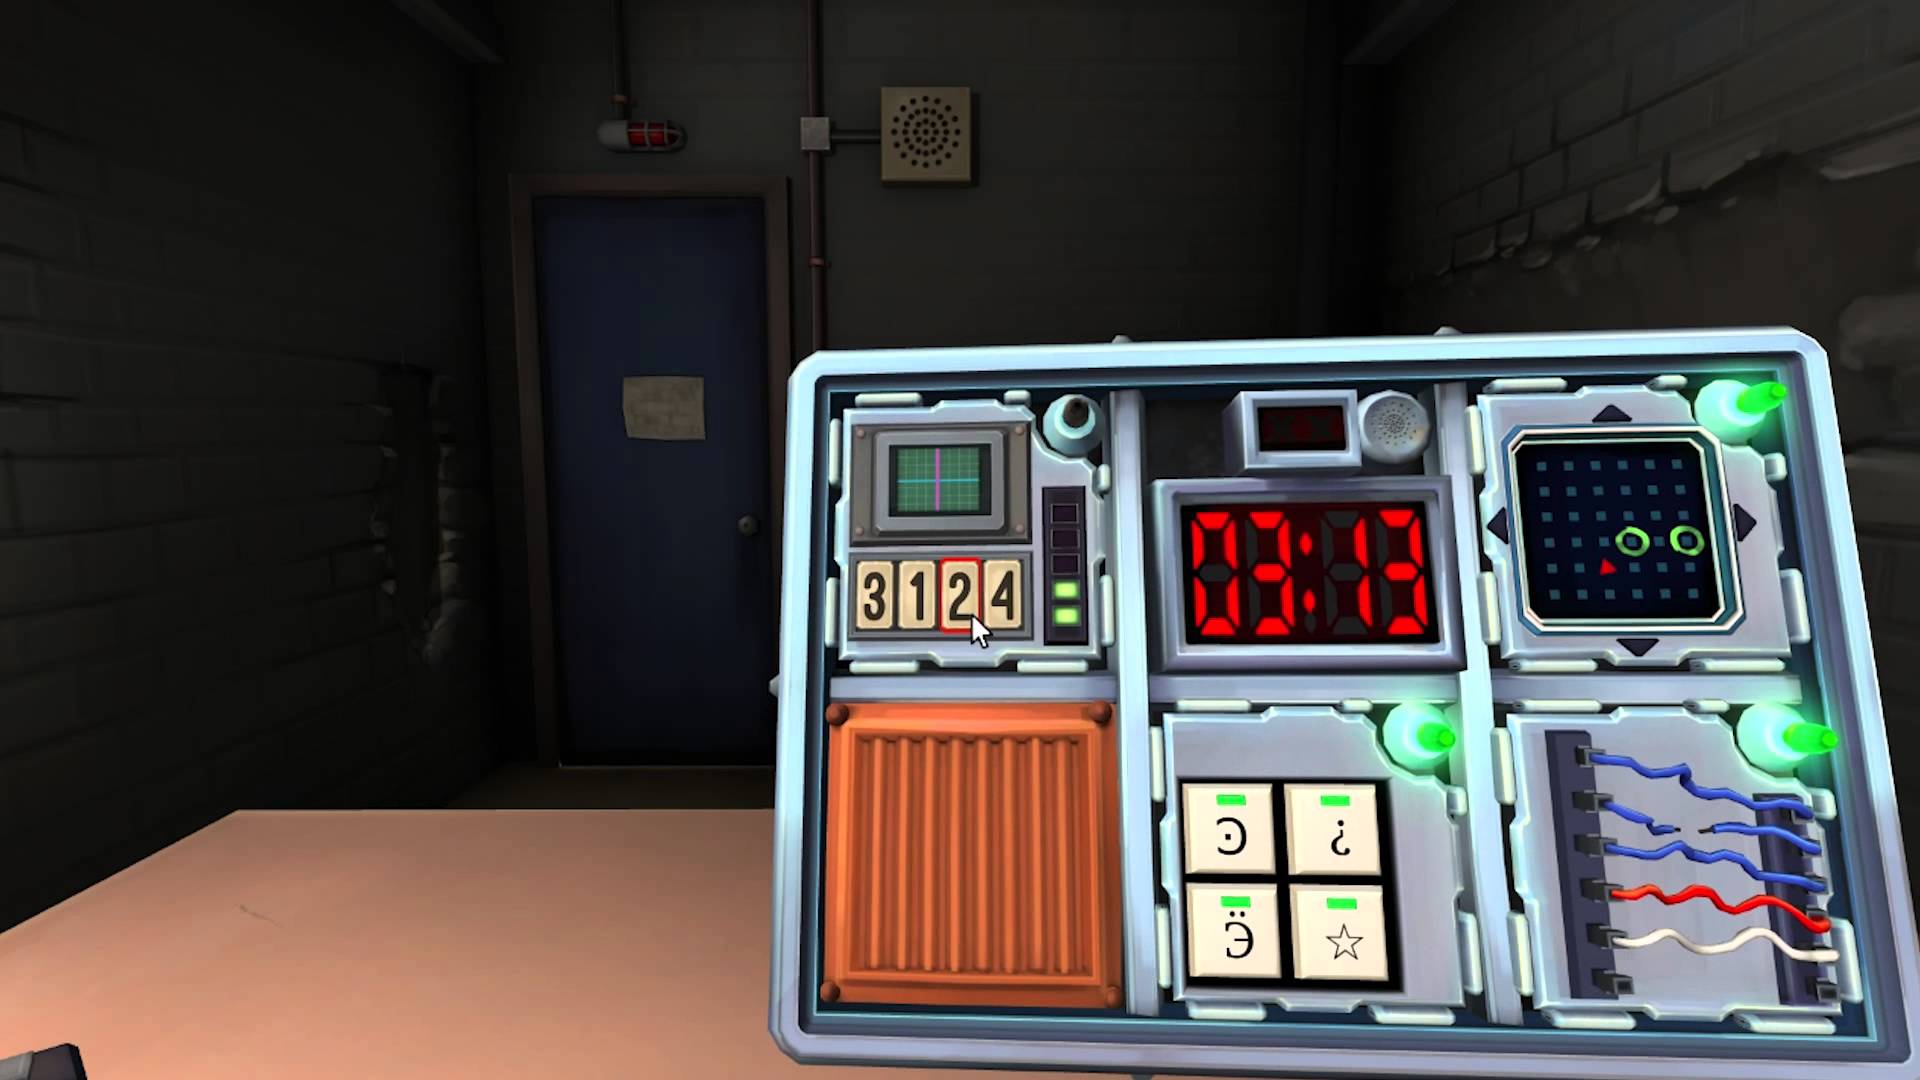 Keep Talking and Nobody Explodes, Steel Crate Games, 2015